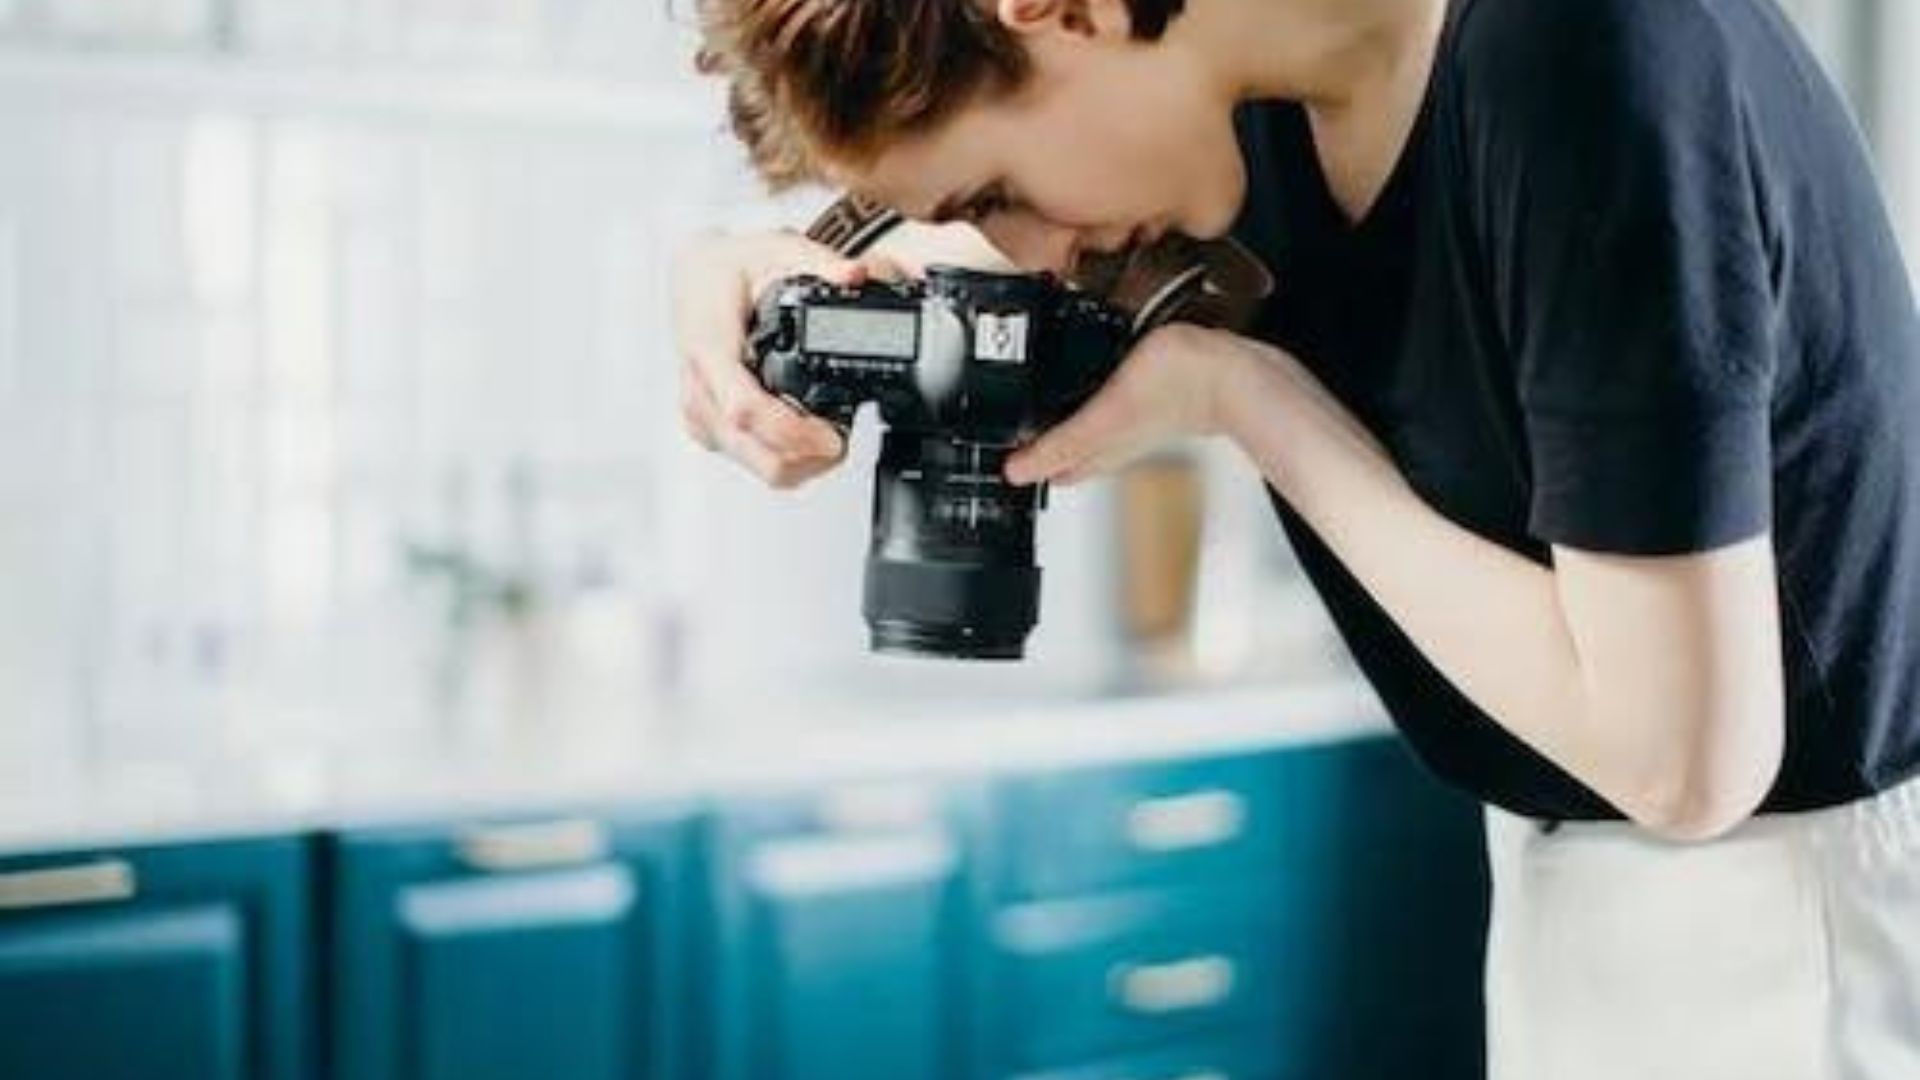 a young man capturing a photograph showing product photography